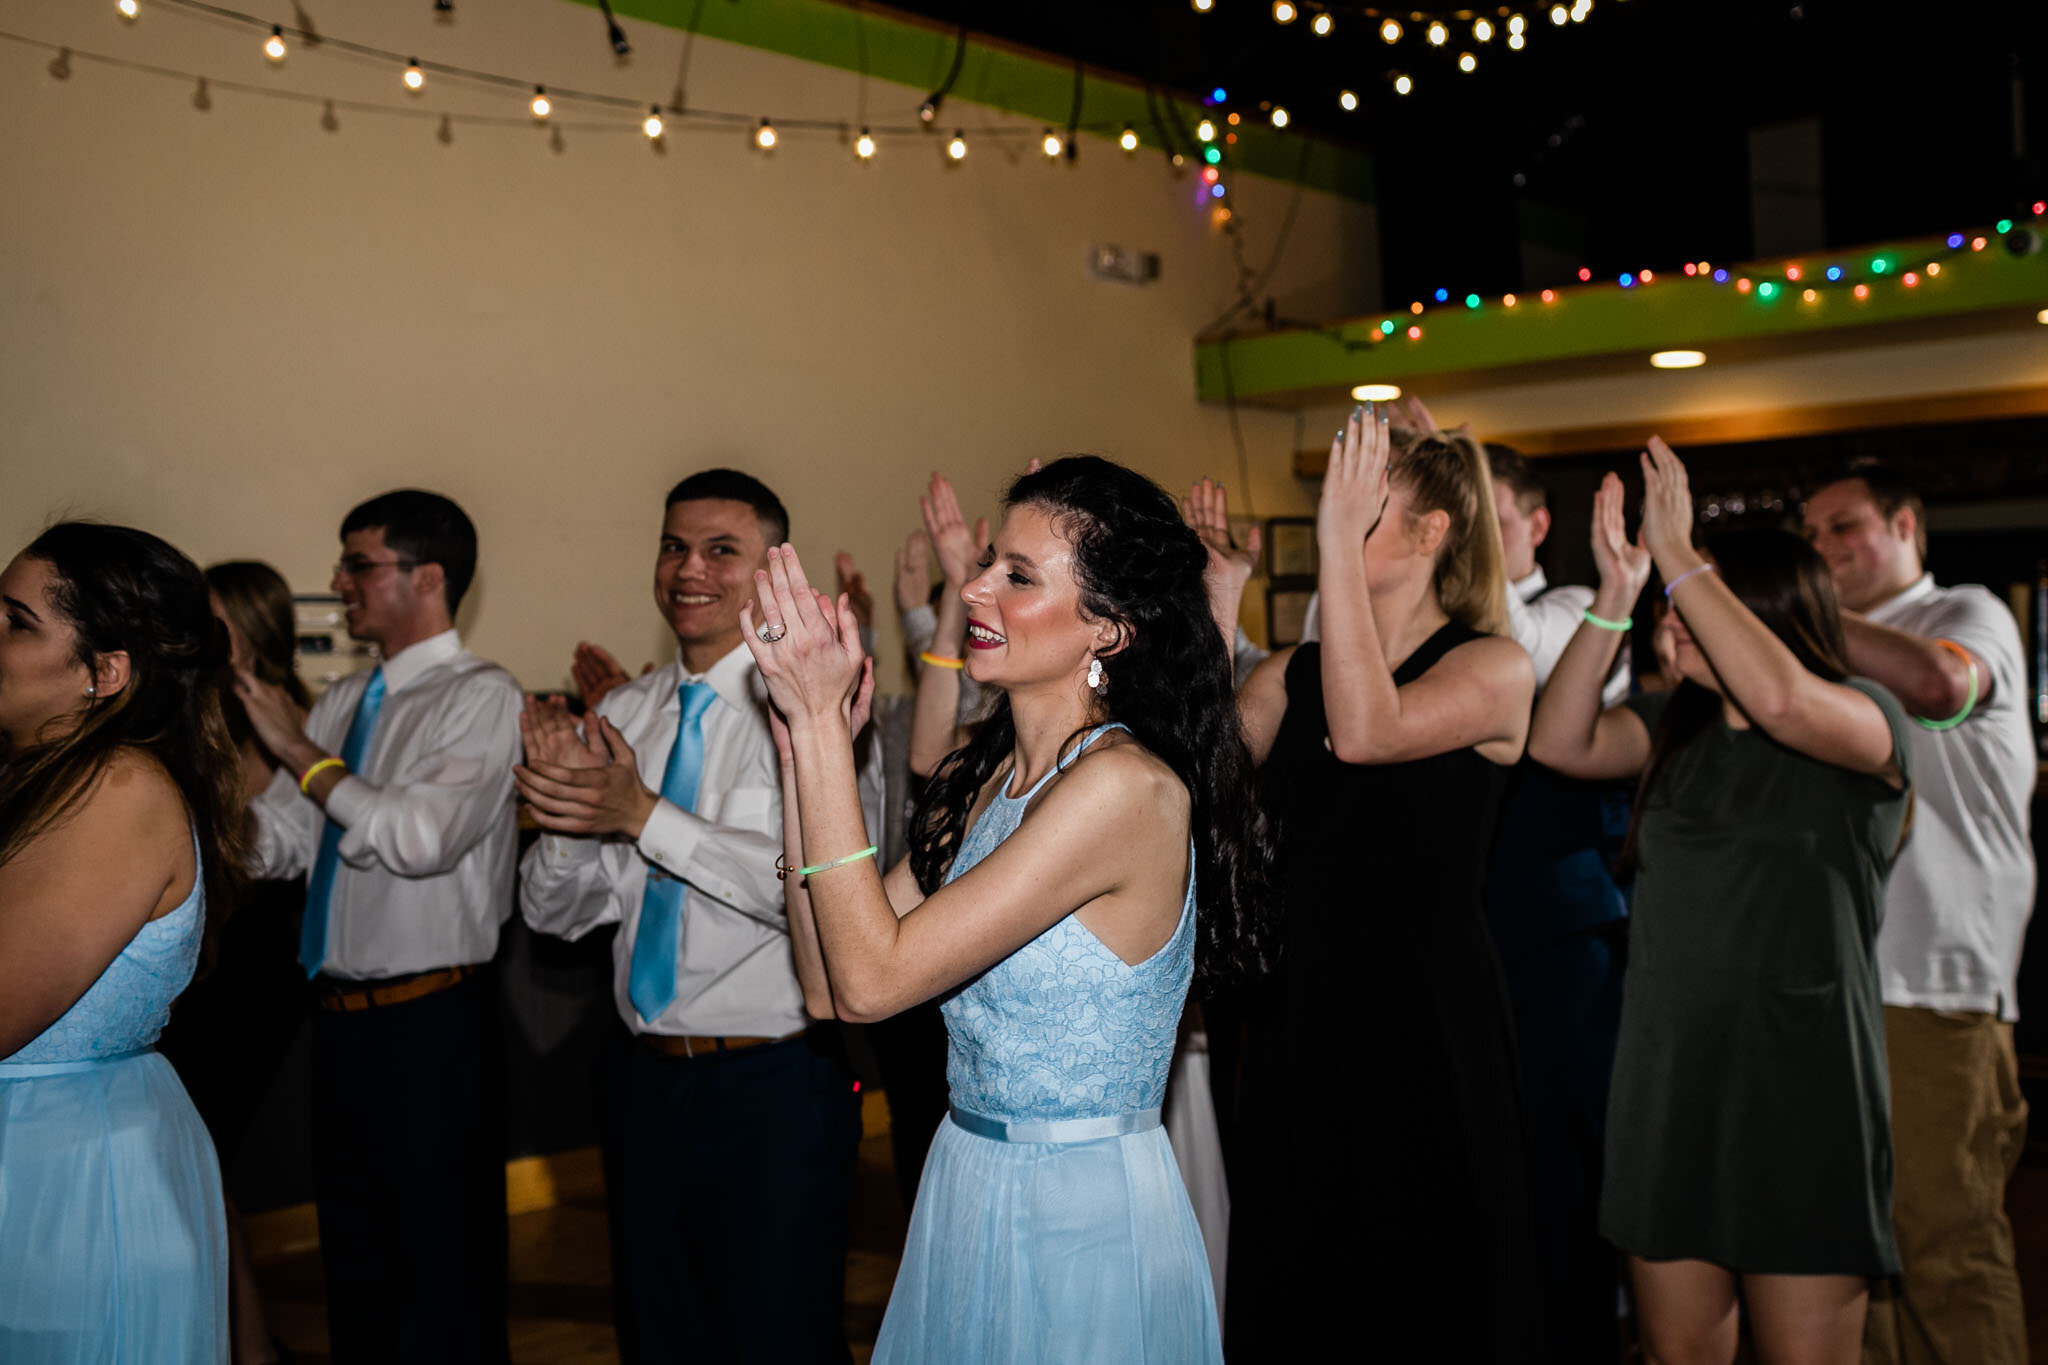 Durham Wedding Photographer | By G. Lin Photography | Woman clapping hands during dancing